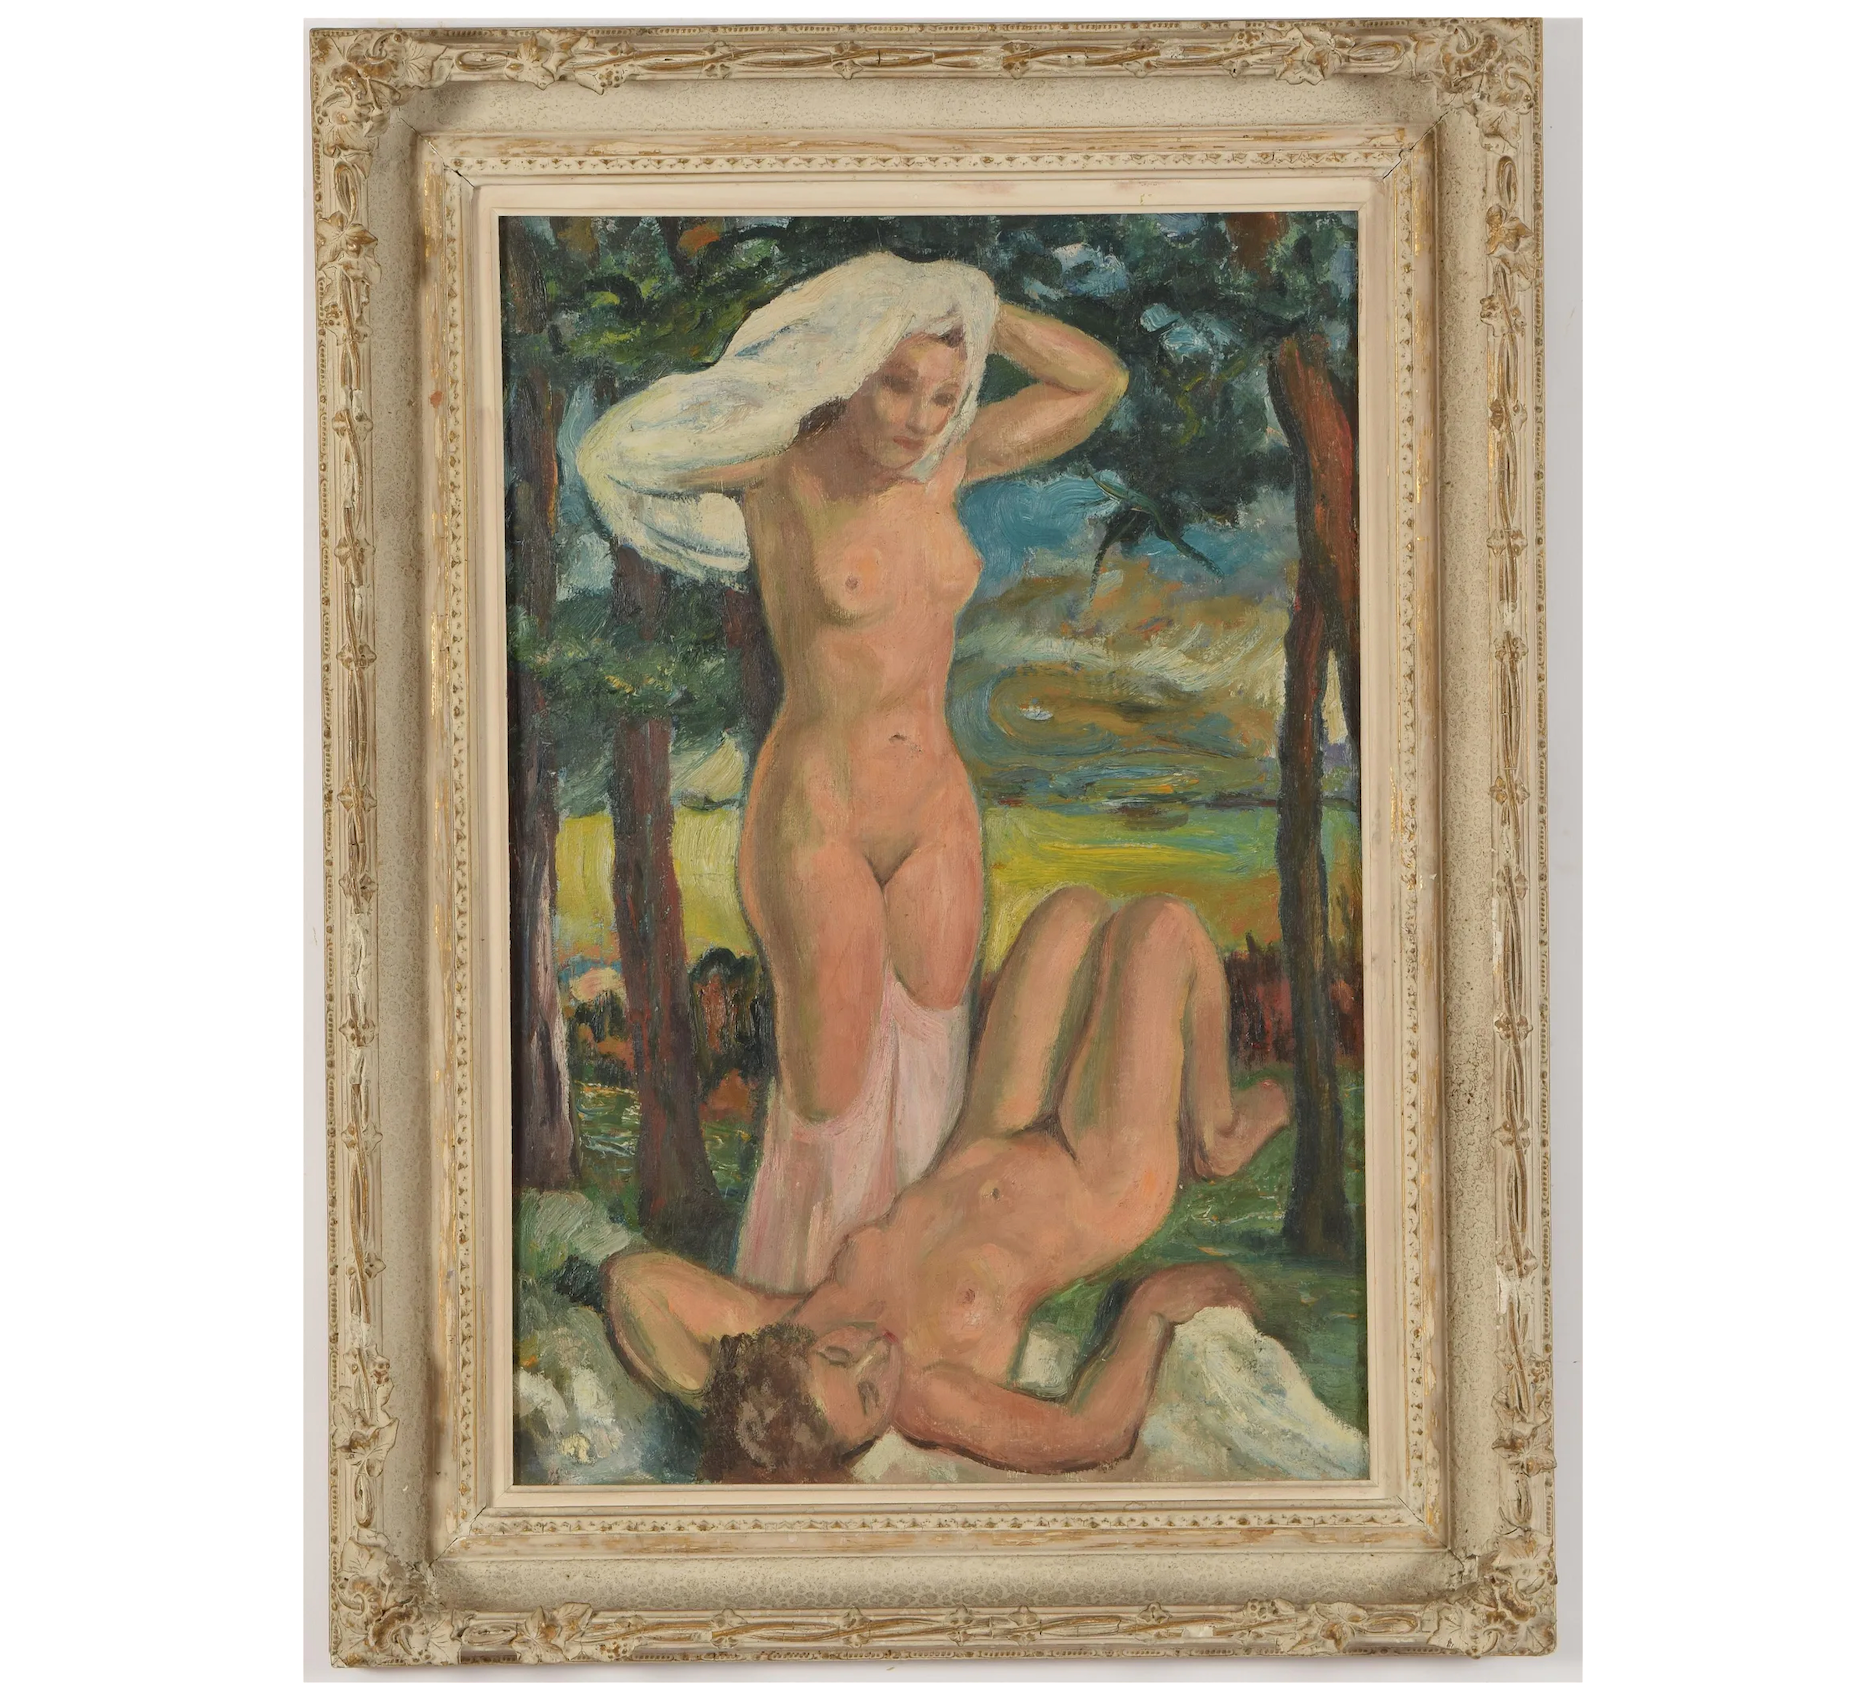 AW588: Early 20th Century Post-Impressionist Painting of Nudes in a Landscape